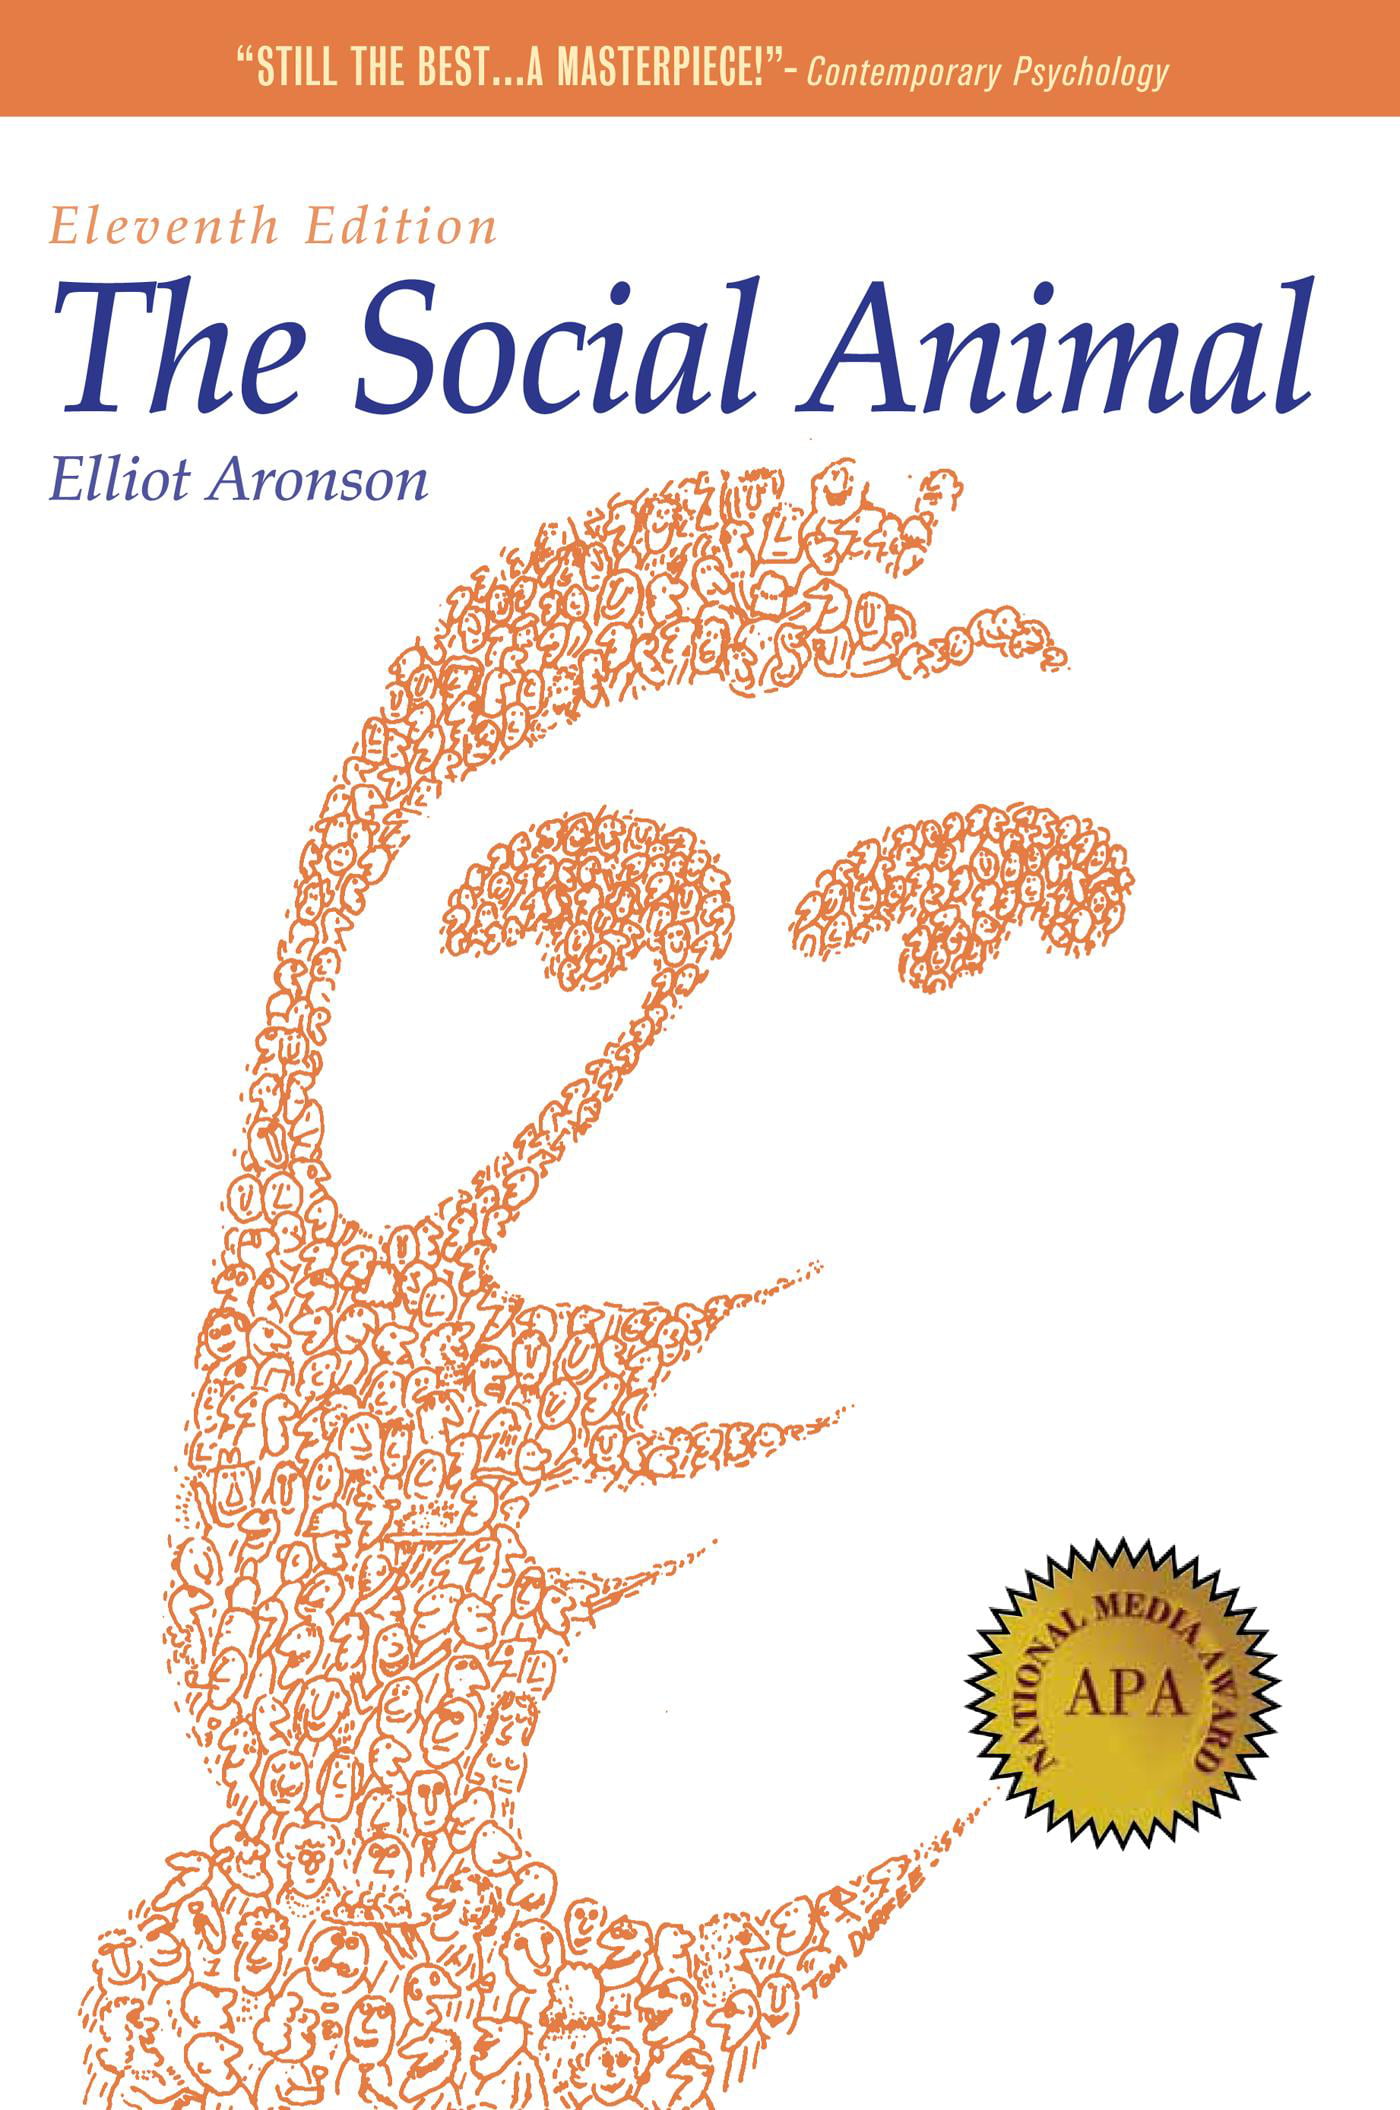 Animal　(Paperback)　The　11)　Social　(Edition